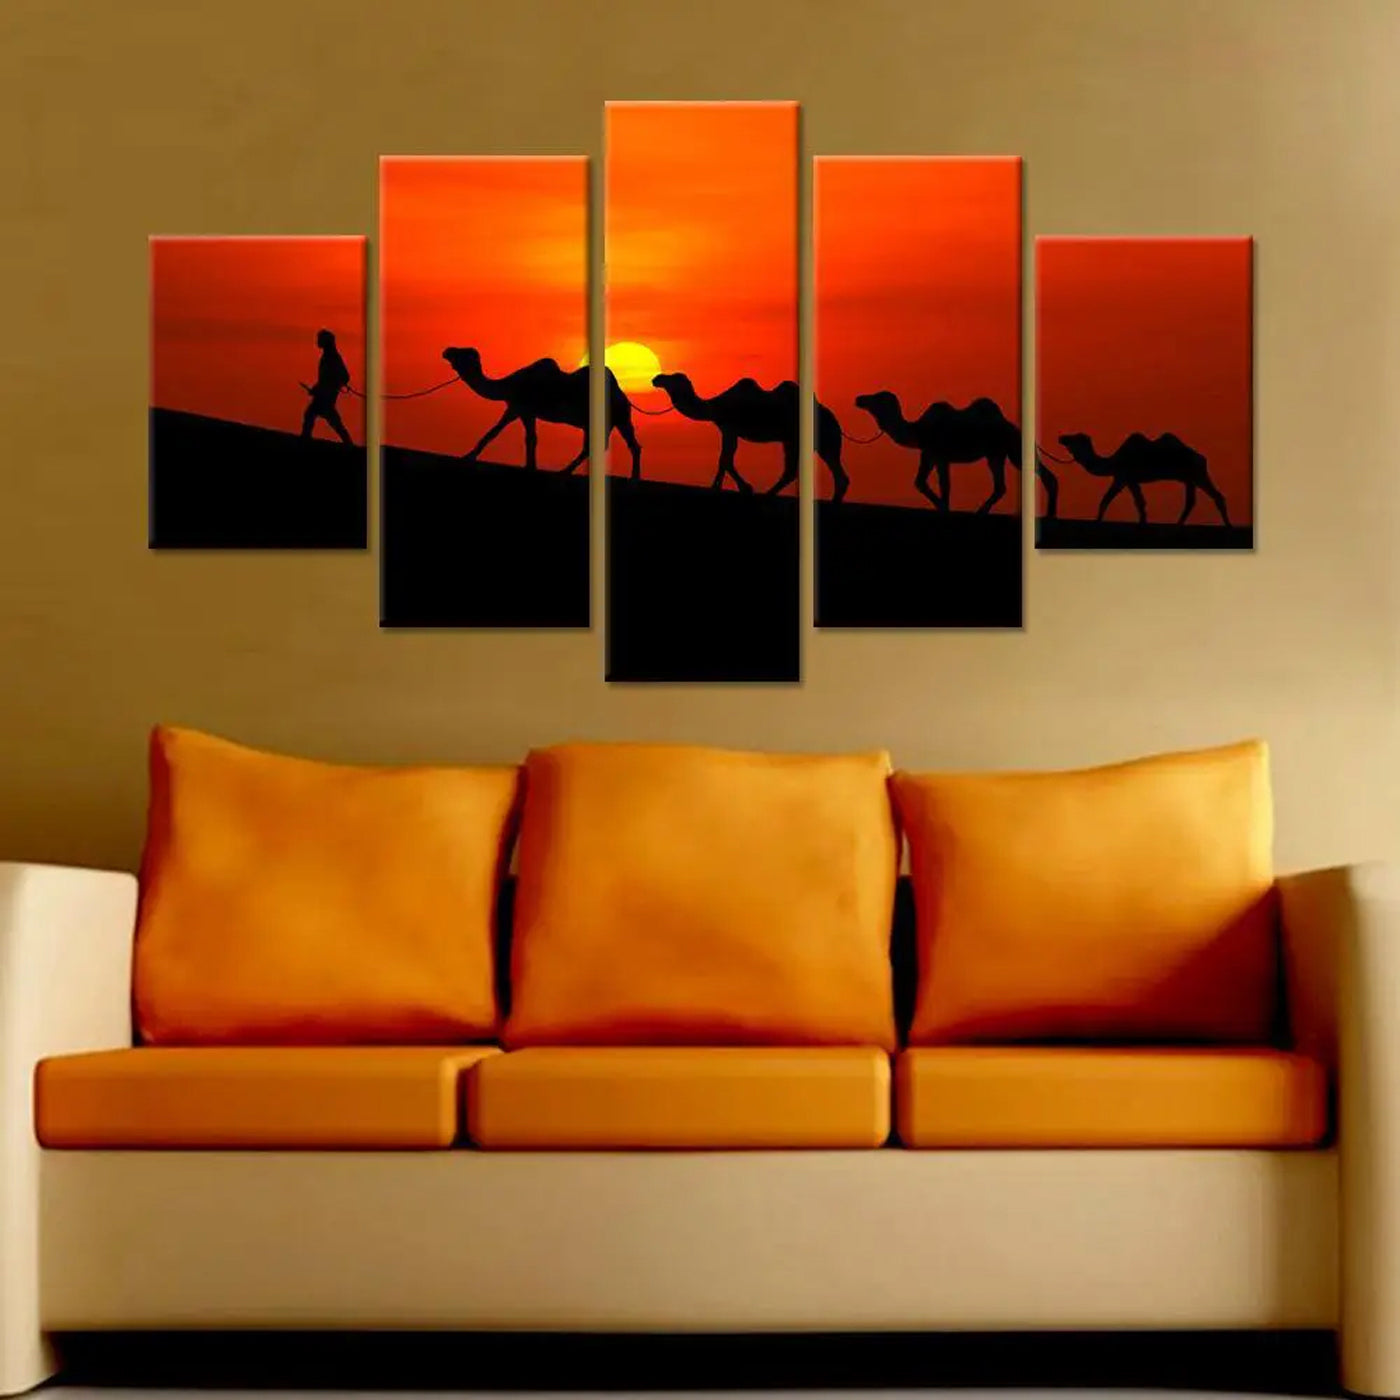 Rajasthan Sandscape: Camel Caravans in Five Panels Wall Painting